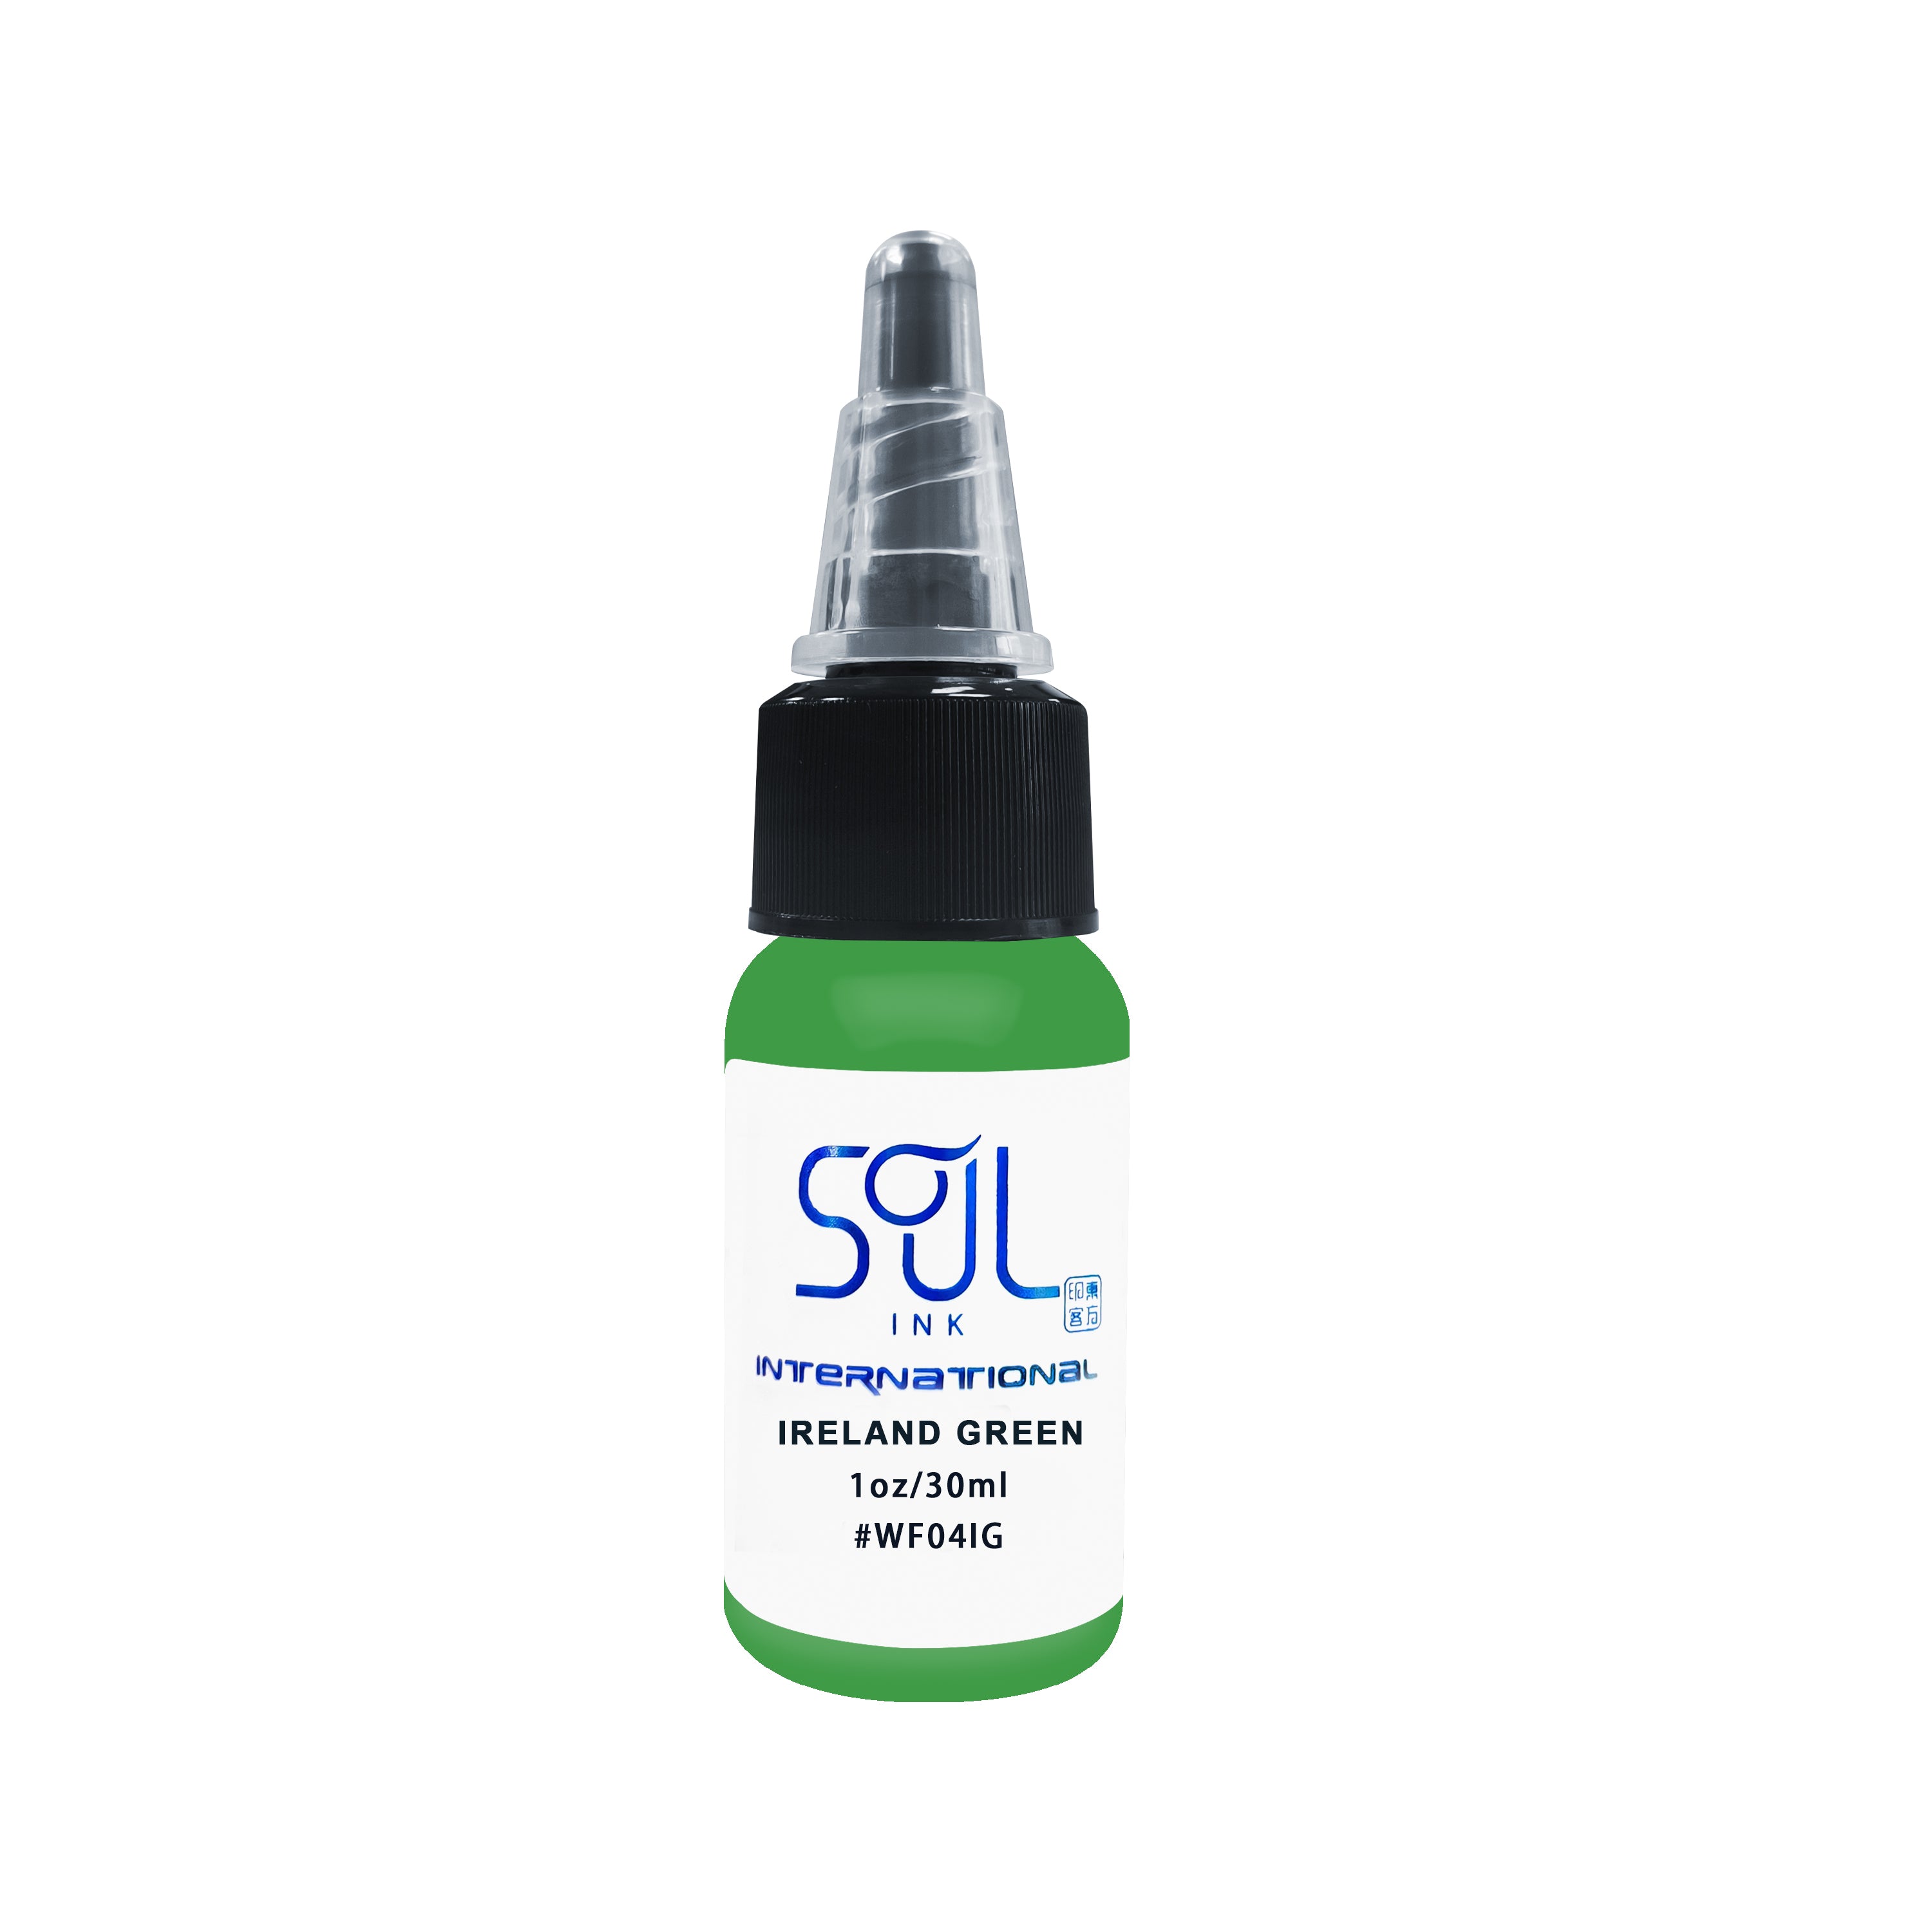 Photograph of a bottle of 'Soul Ink' brand Ireland green ink. The label prominently displays the brand name 'Soul Ink' in stylish blue typography against a white background. The Ireland green 30 ml bottle with a white label featuring the brands name 'Soul Ink'.